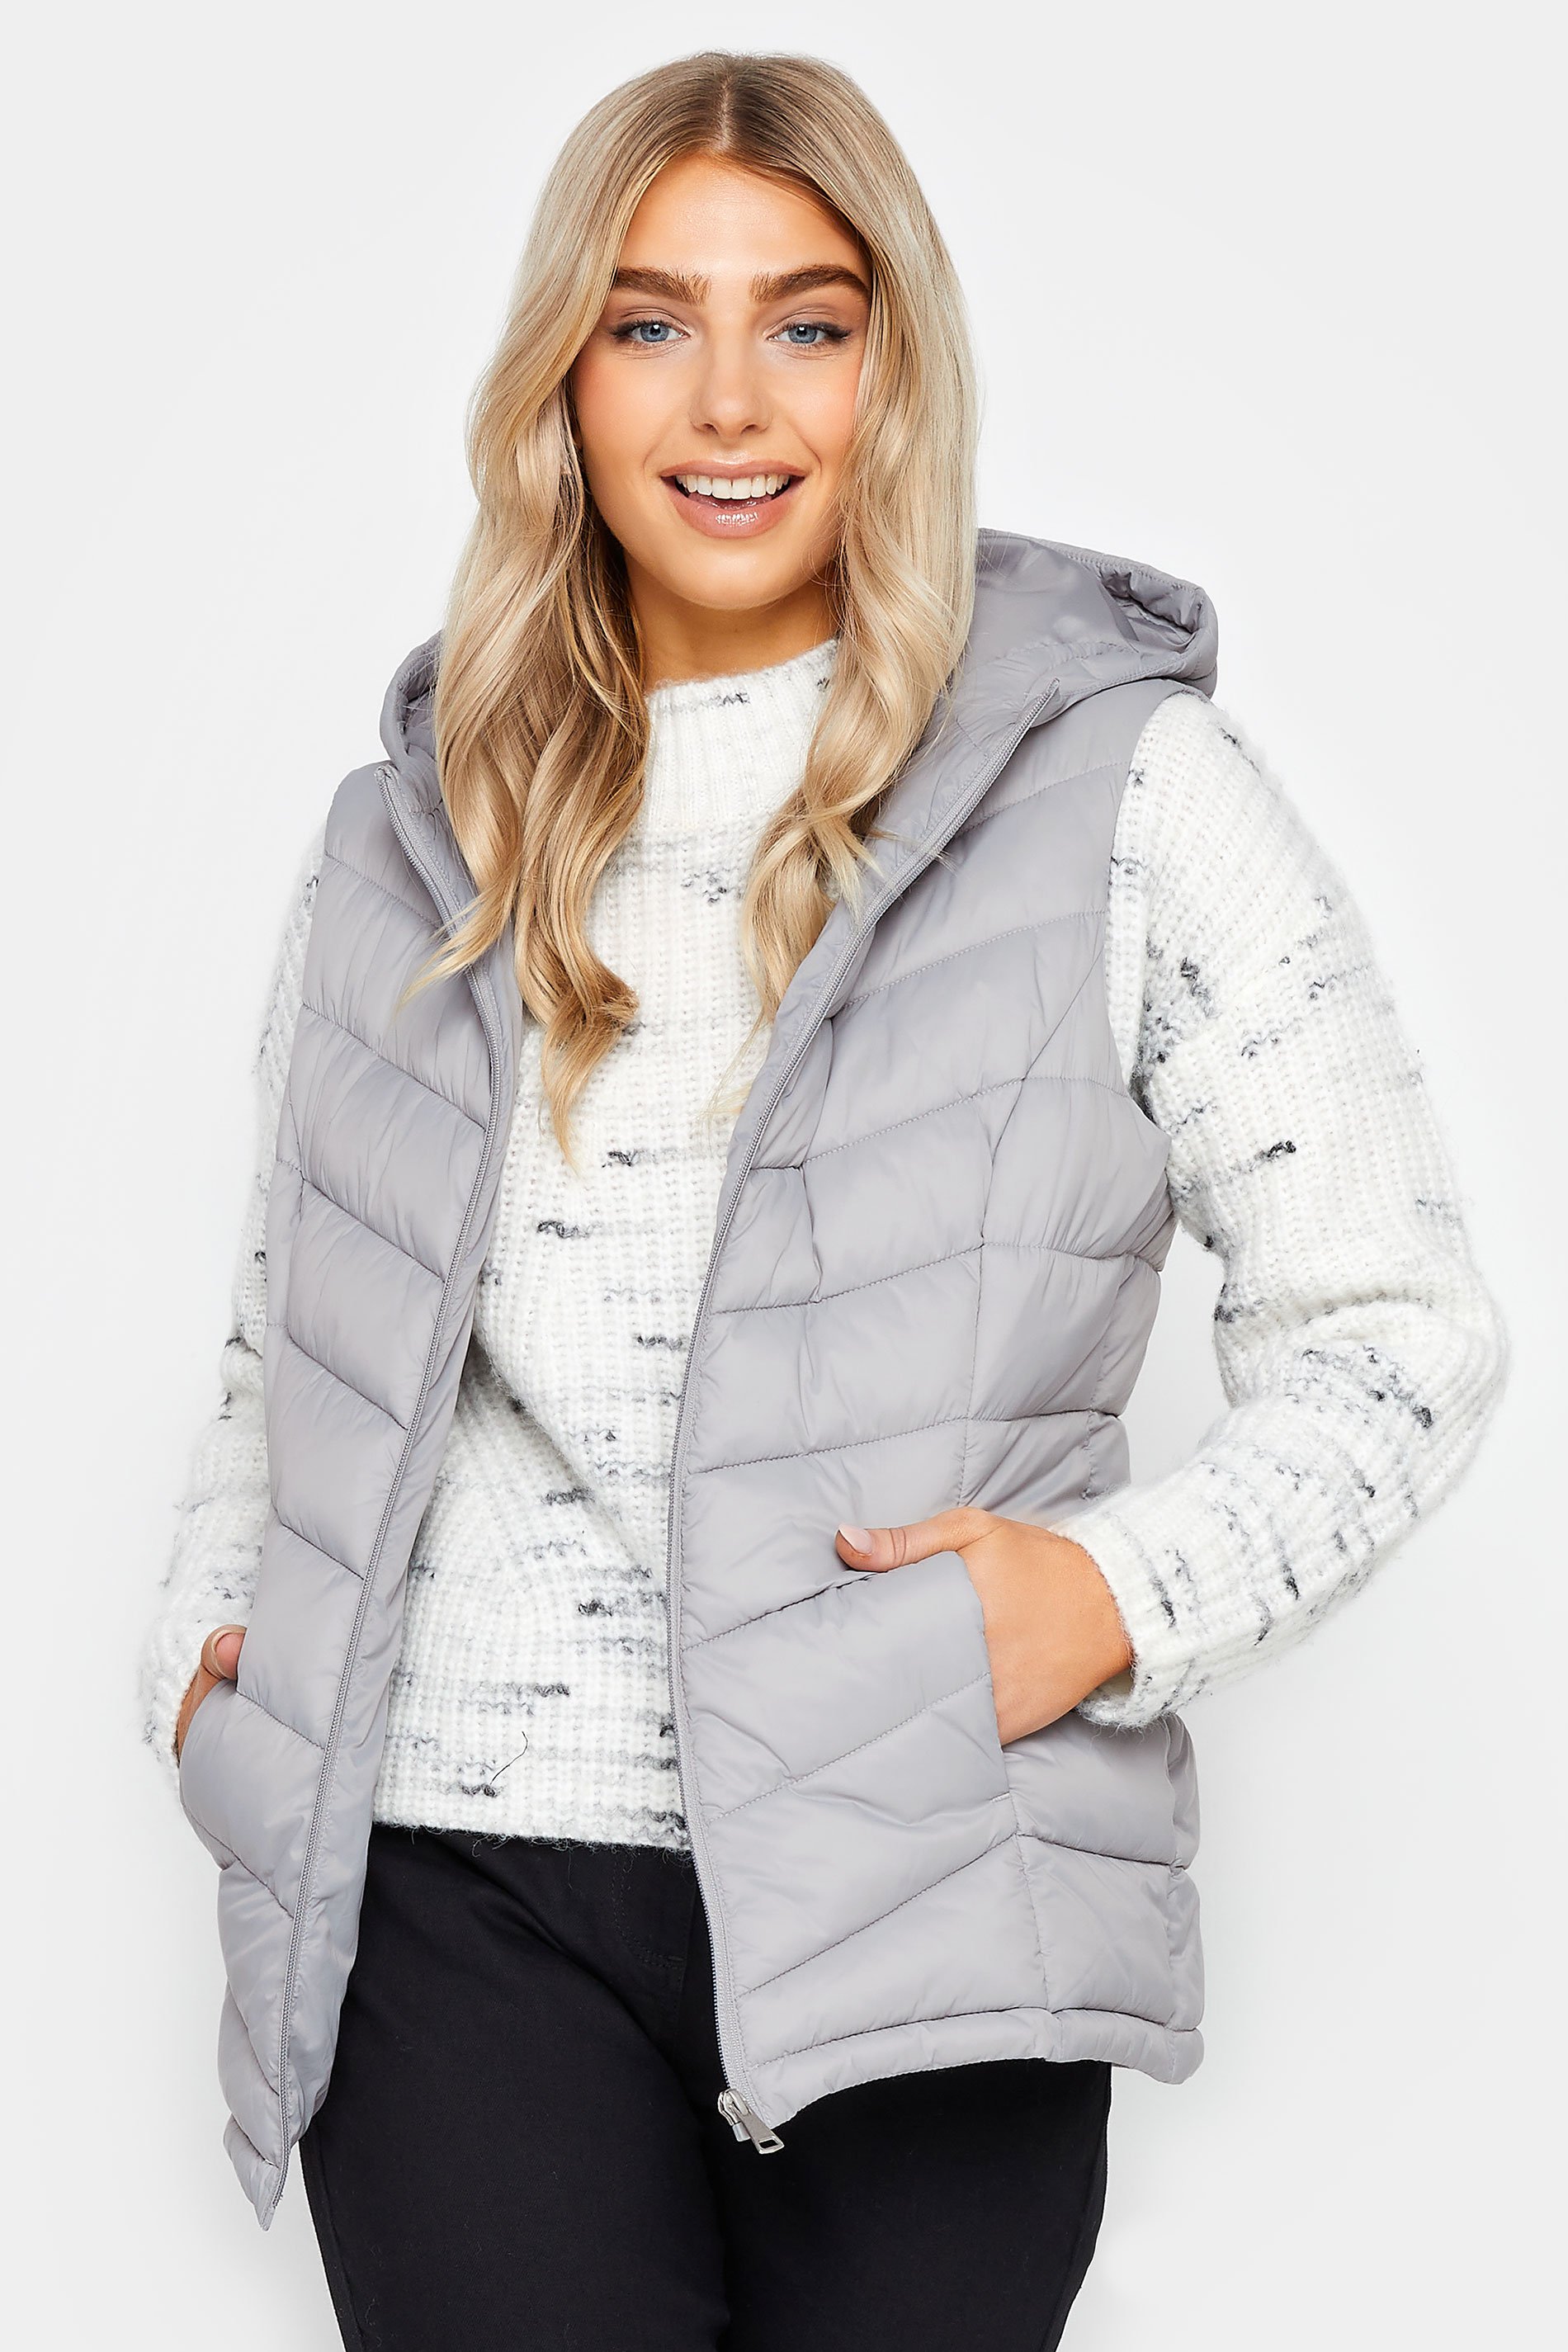 M&Co Grey Quilted Gilet | M&Co 1